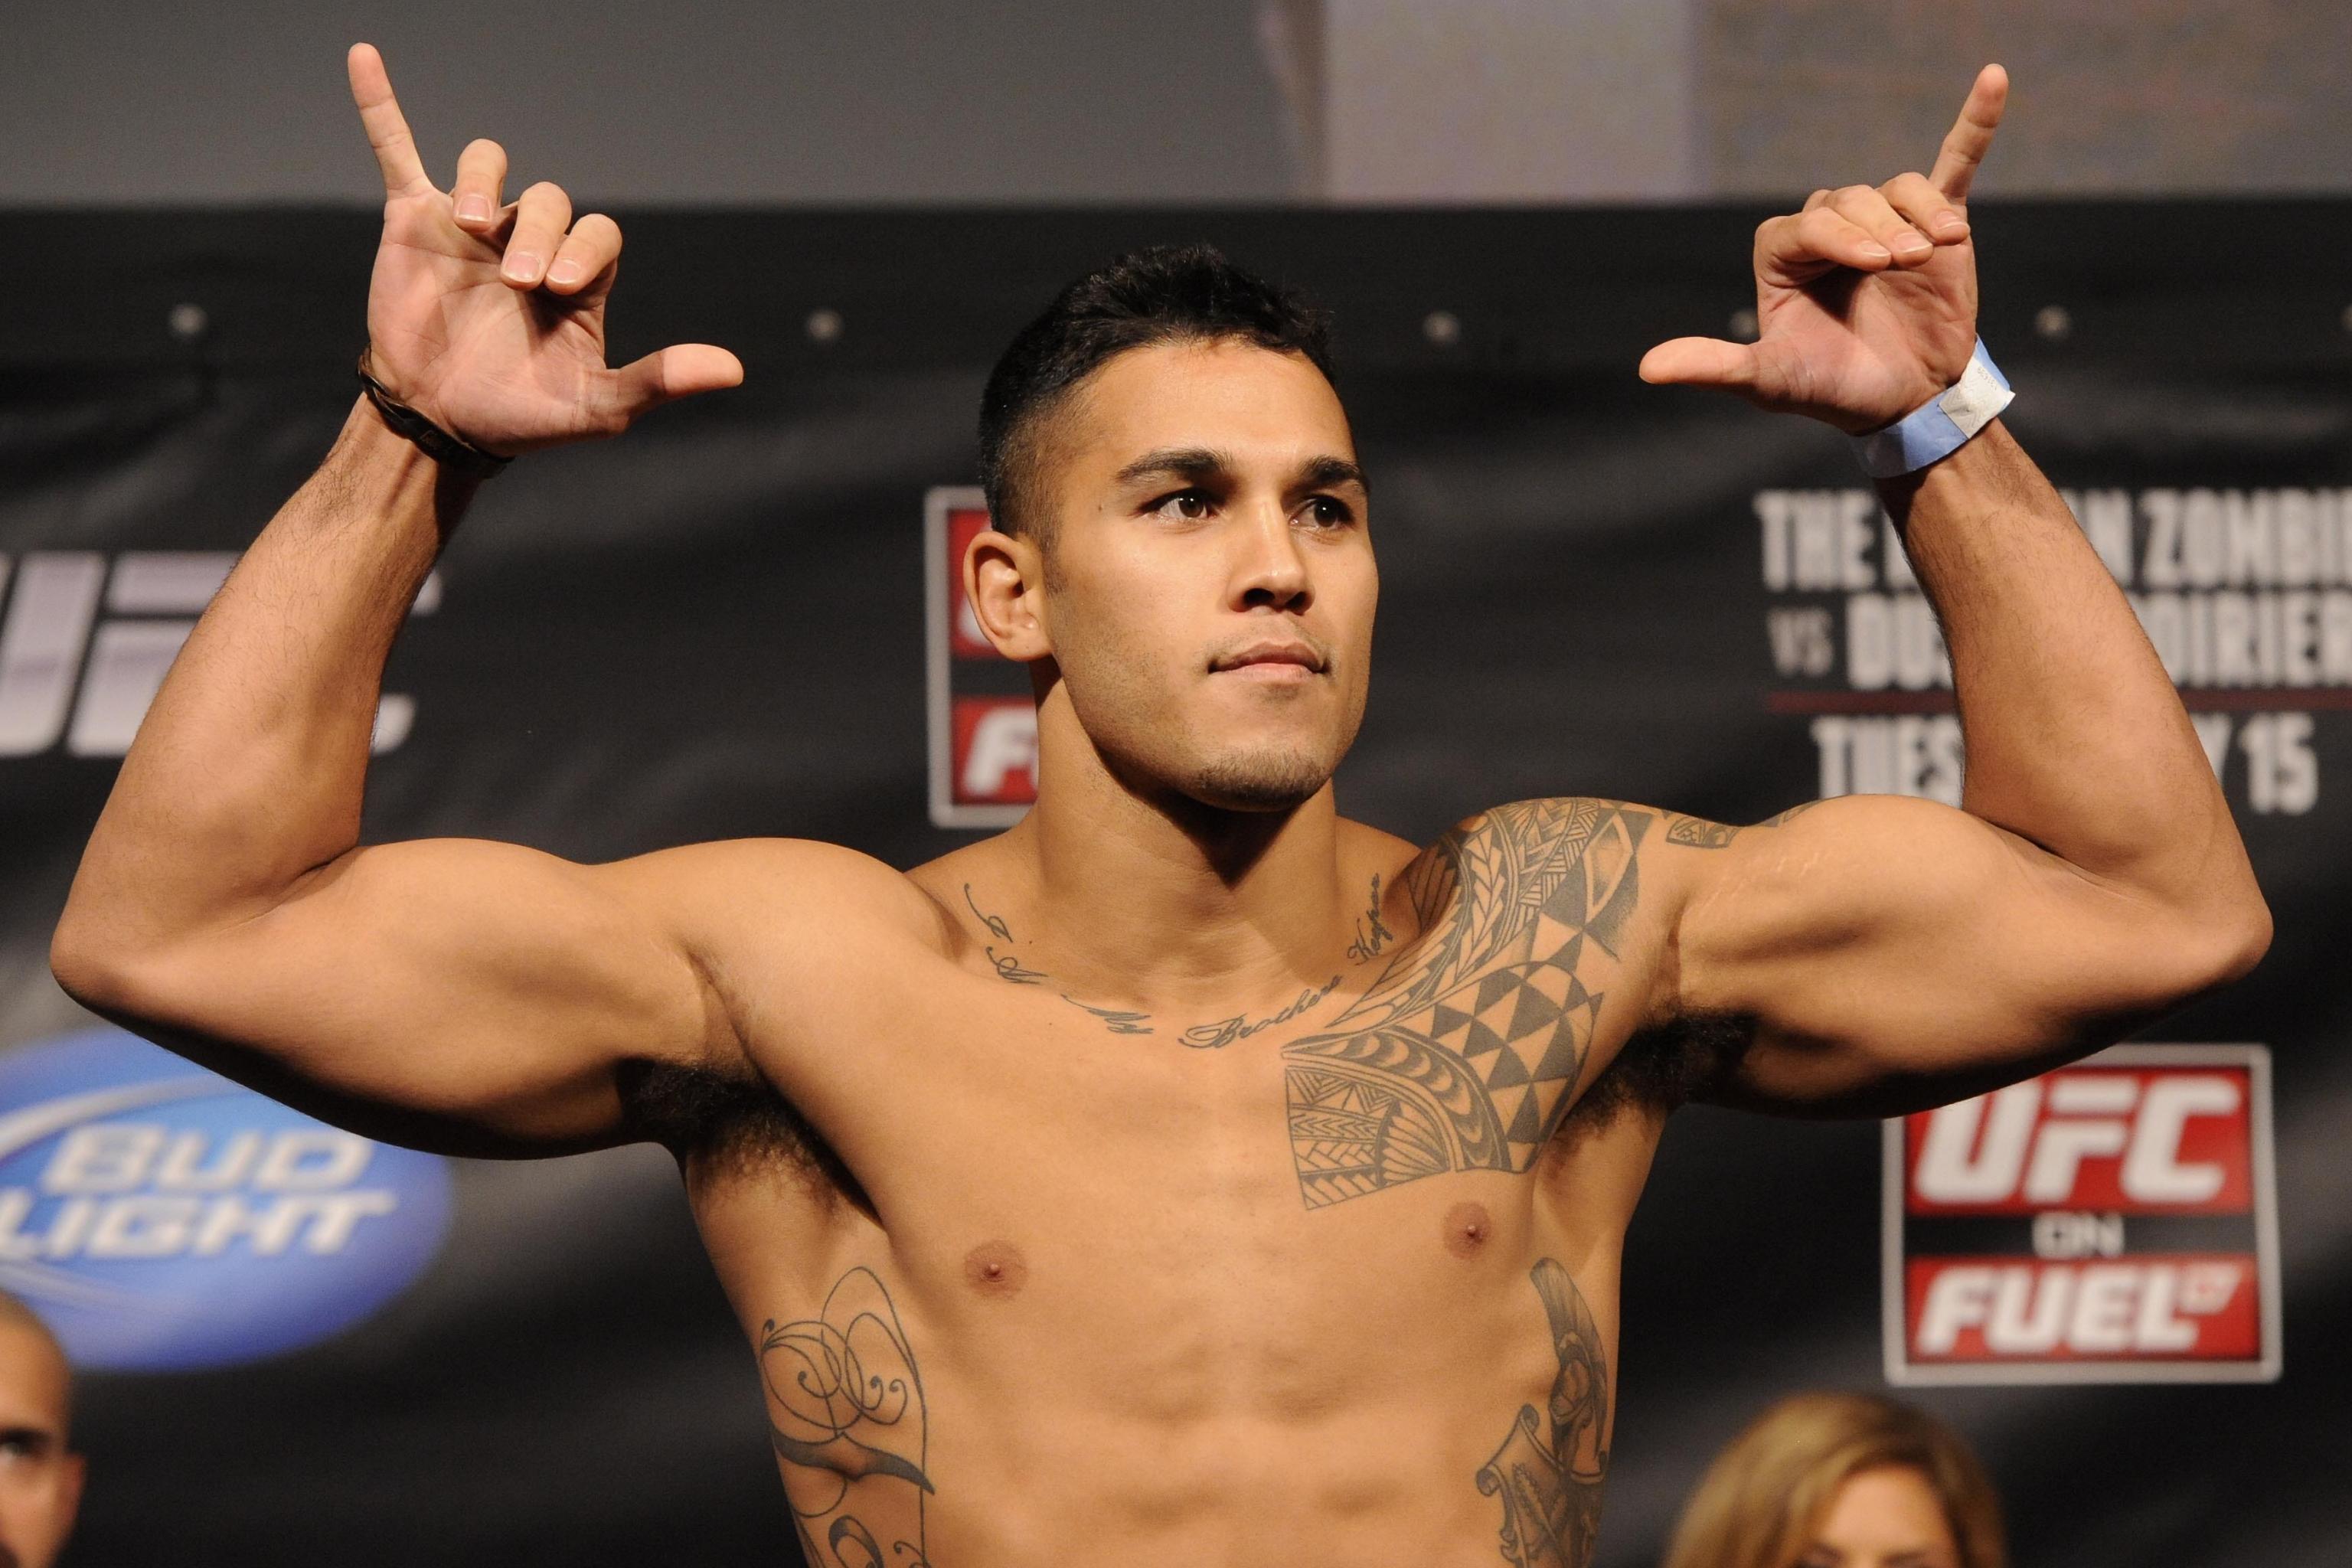 UFC middleweight Brad Tavares out of 'TUF' 27 Finale bout